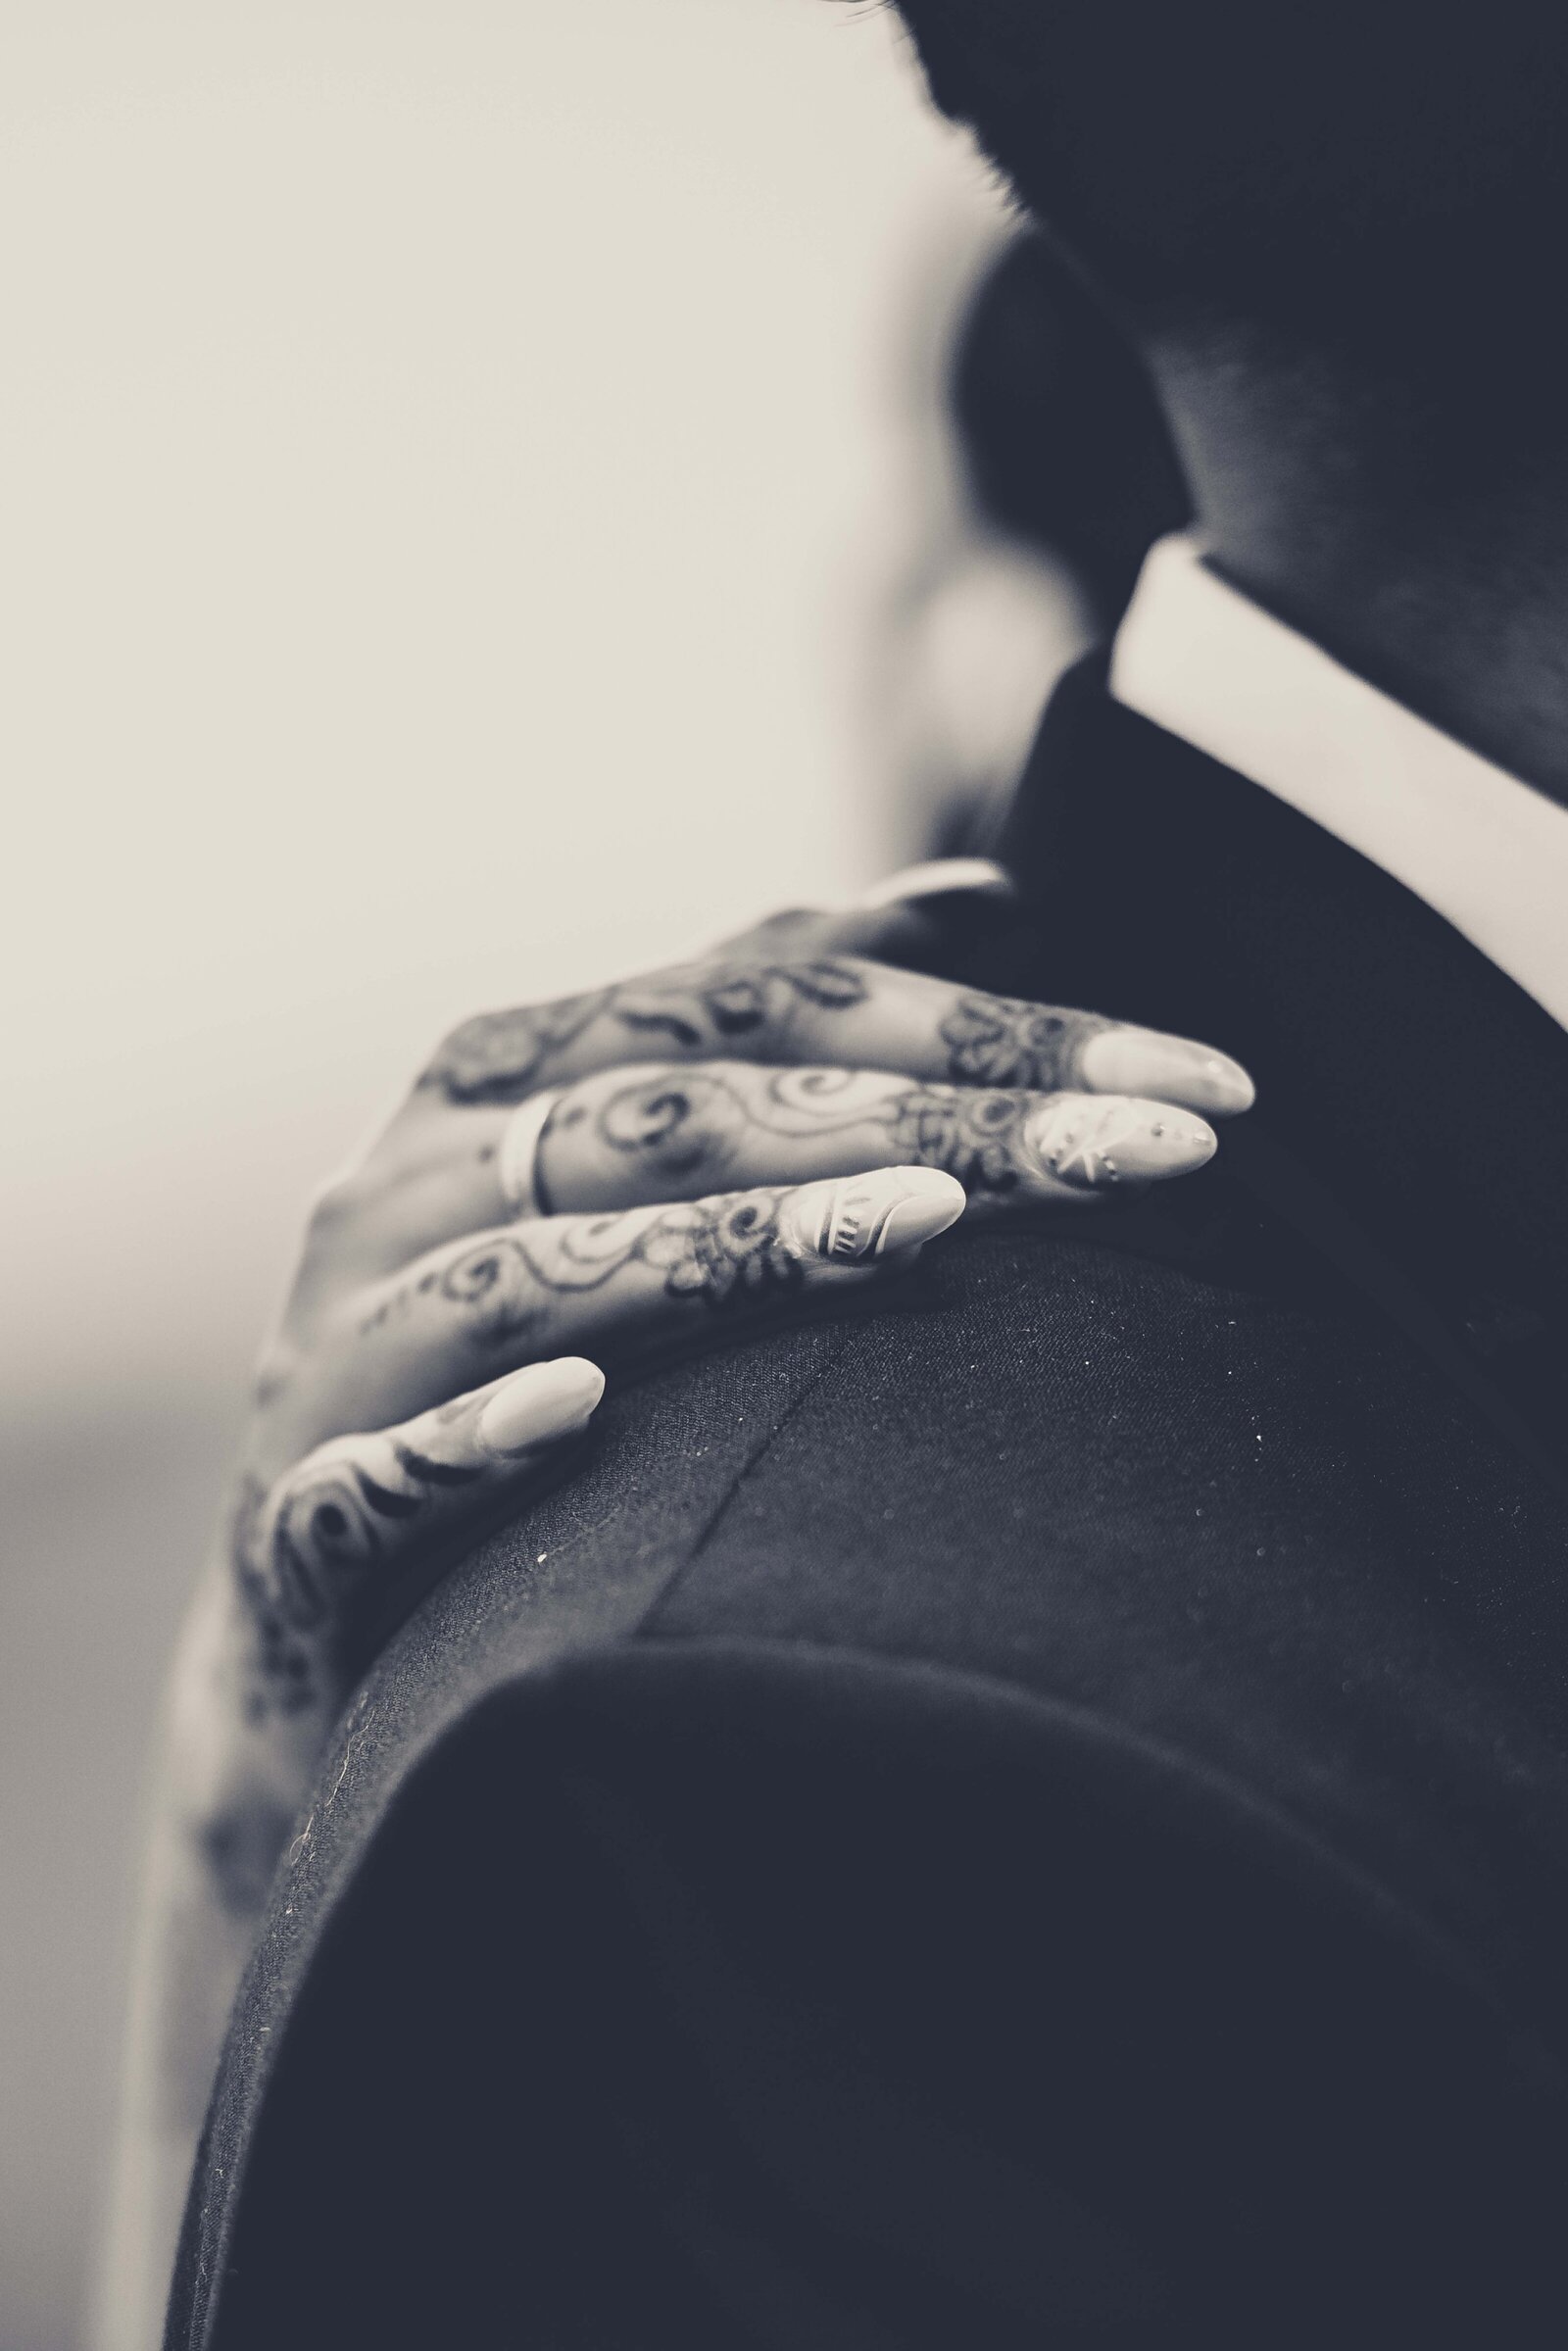 This stunning photograph showcases the intricate henna designs on the bride's hand as it gently rests on her husband's shoulder, symbolizing their newly formed bond. The fine details of the henna reflect the meticulous preparation and cultural significance of their union. Ideal for couples who appreciate the beauty of traditional wedding elements and those looking for inspiration for their own multicultural celebrations.